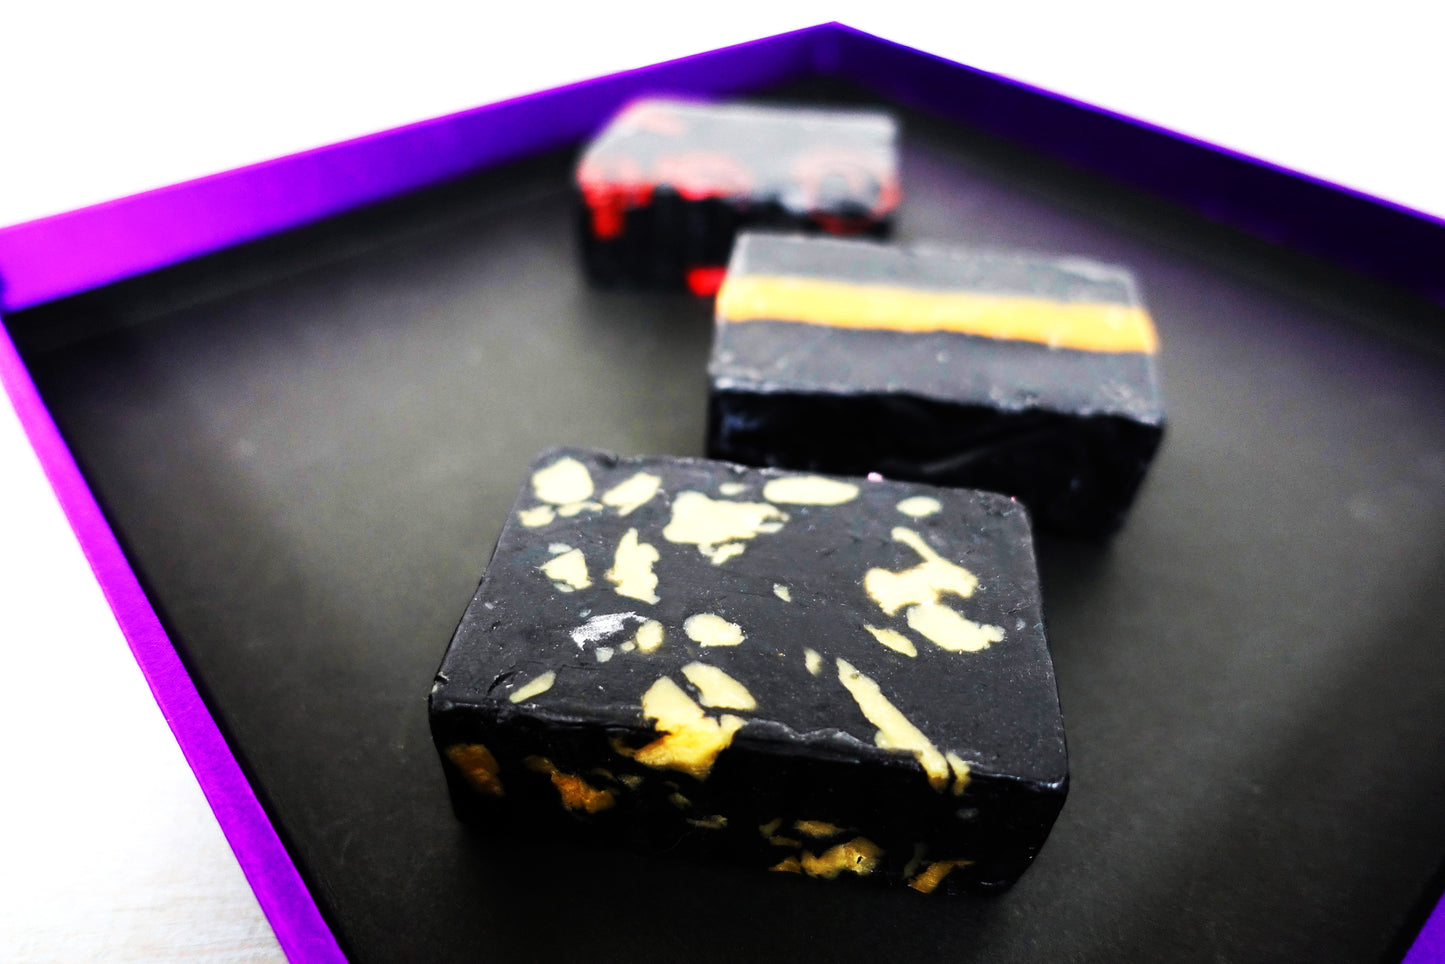 Activated Charcoal Fullers Earth Handcrafted Luxury Herbal Soap 活性炭富勒土手工美白皂